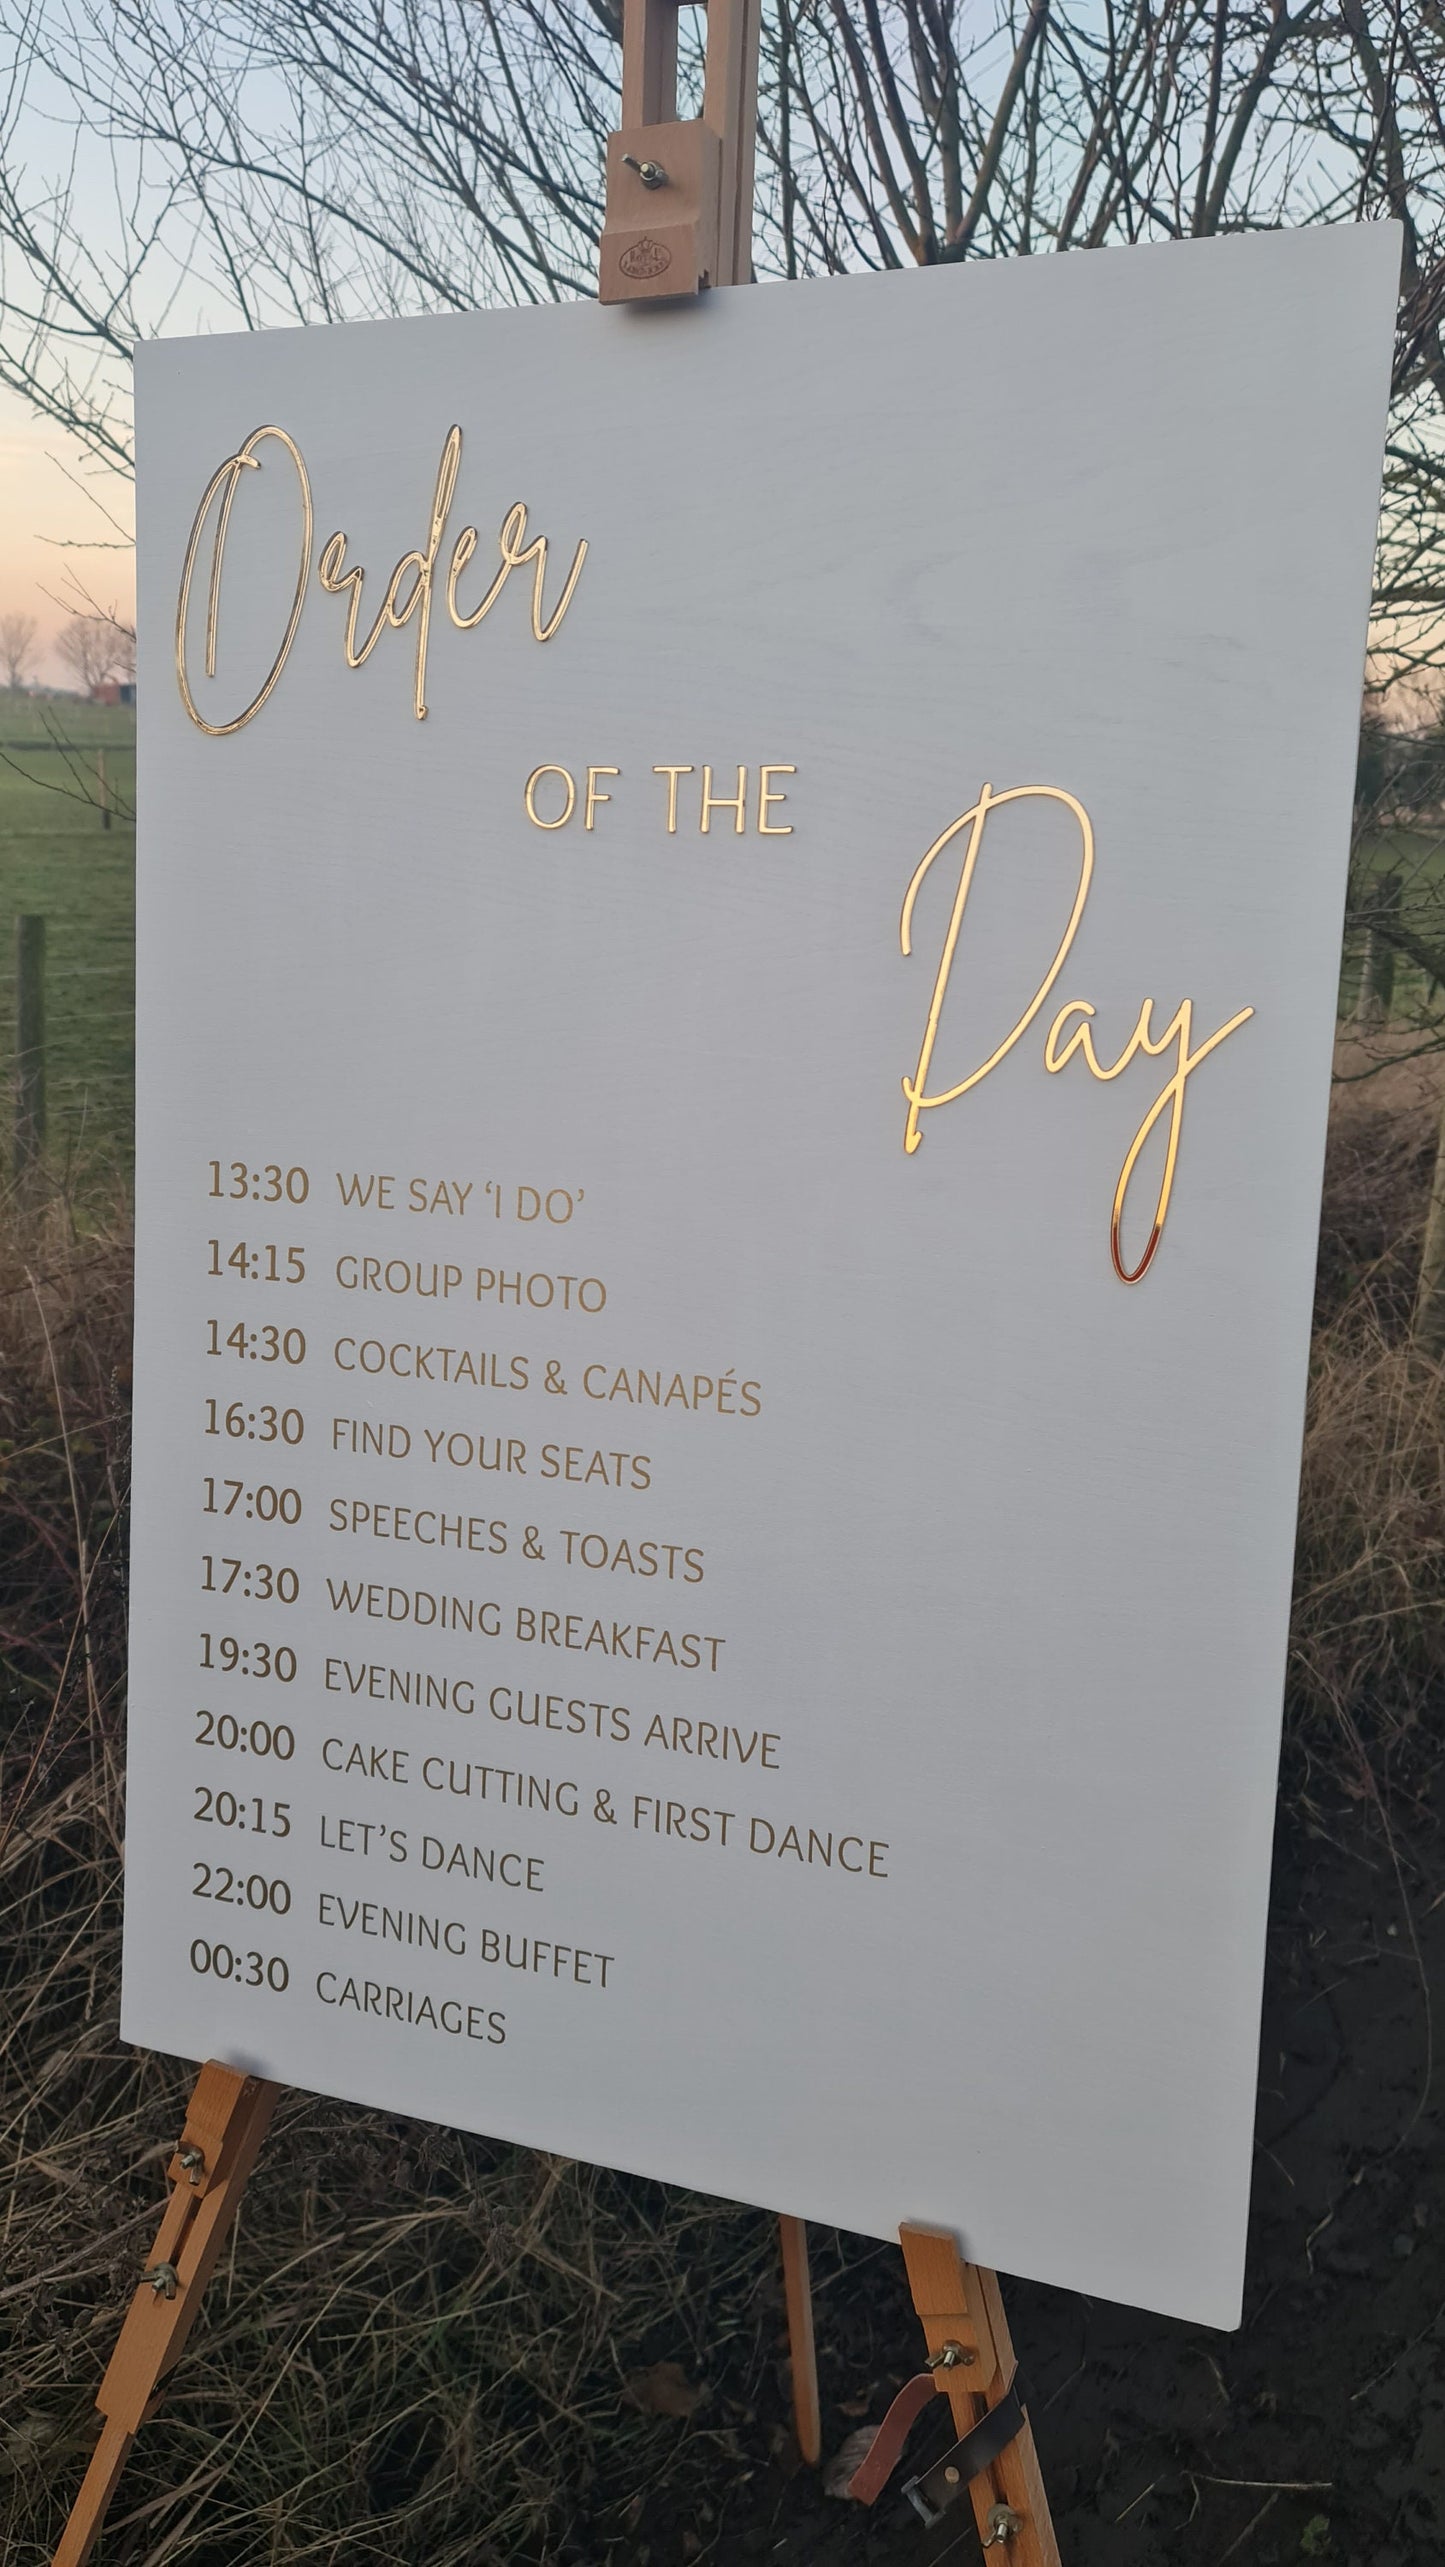 Elegant white and gold order of the day wedding sign with a clear and organized schedule of events, including ceremony and reception, hand-painted with high-quality materials and laser-engraved for a lasting keepsake. Perfect for guiding guests.